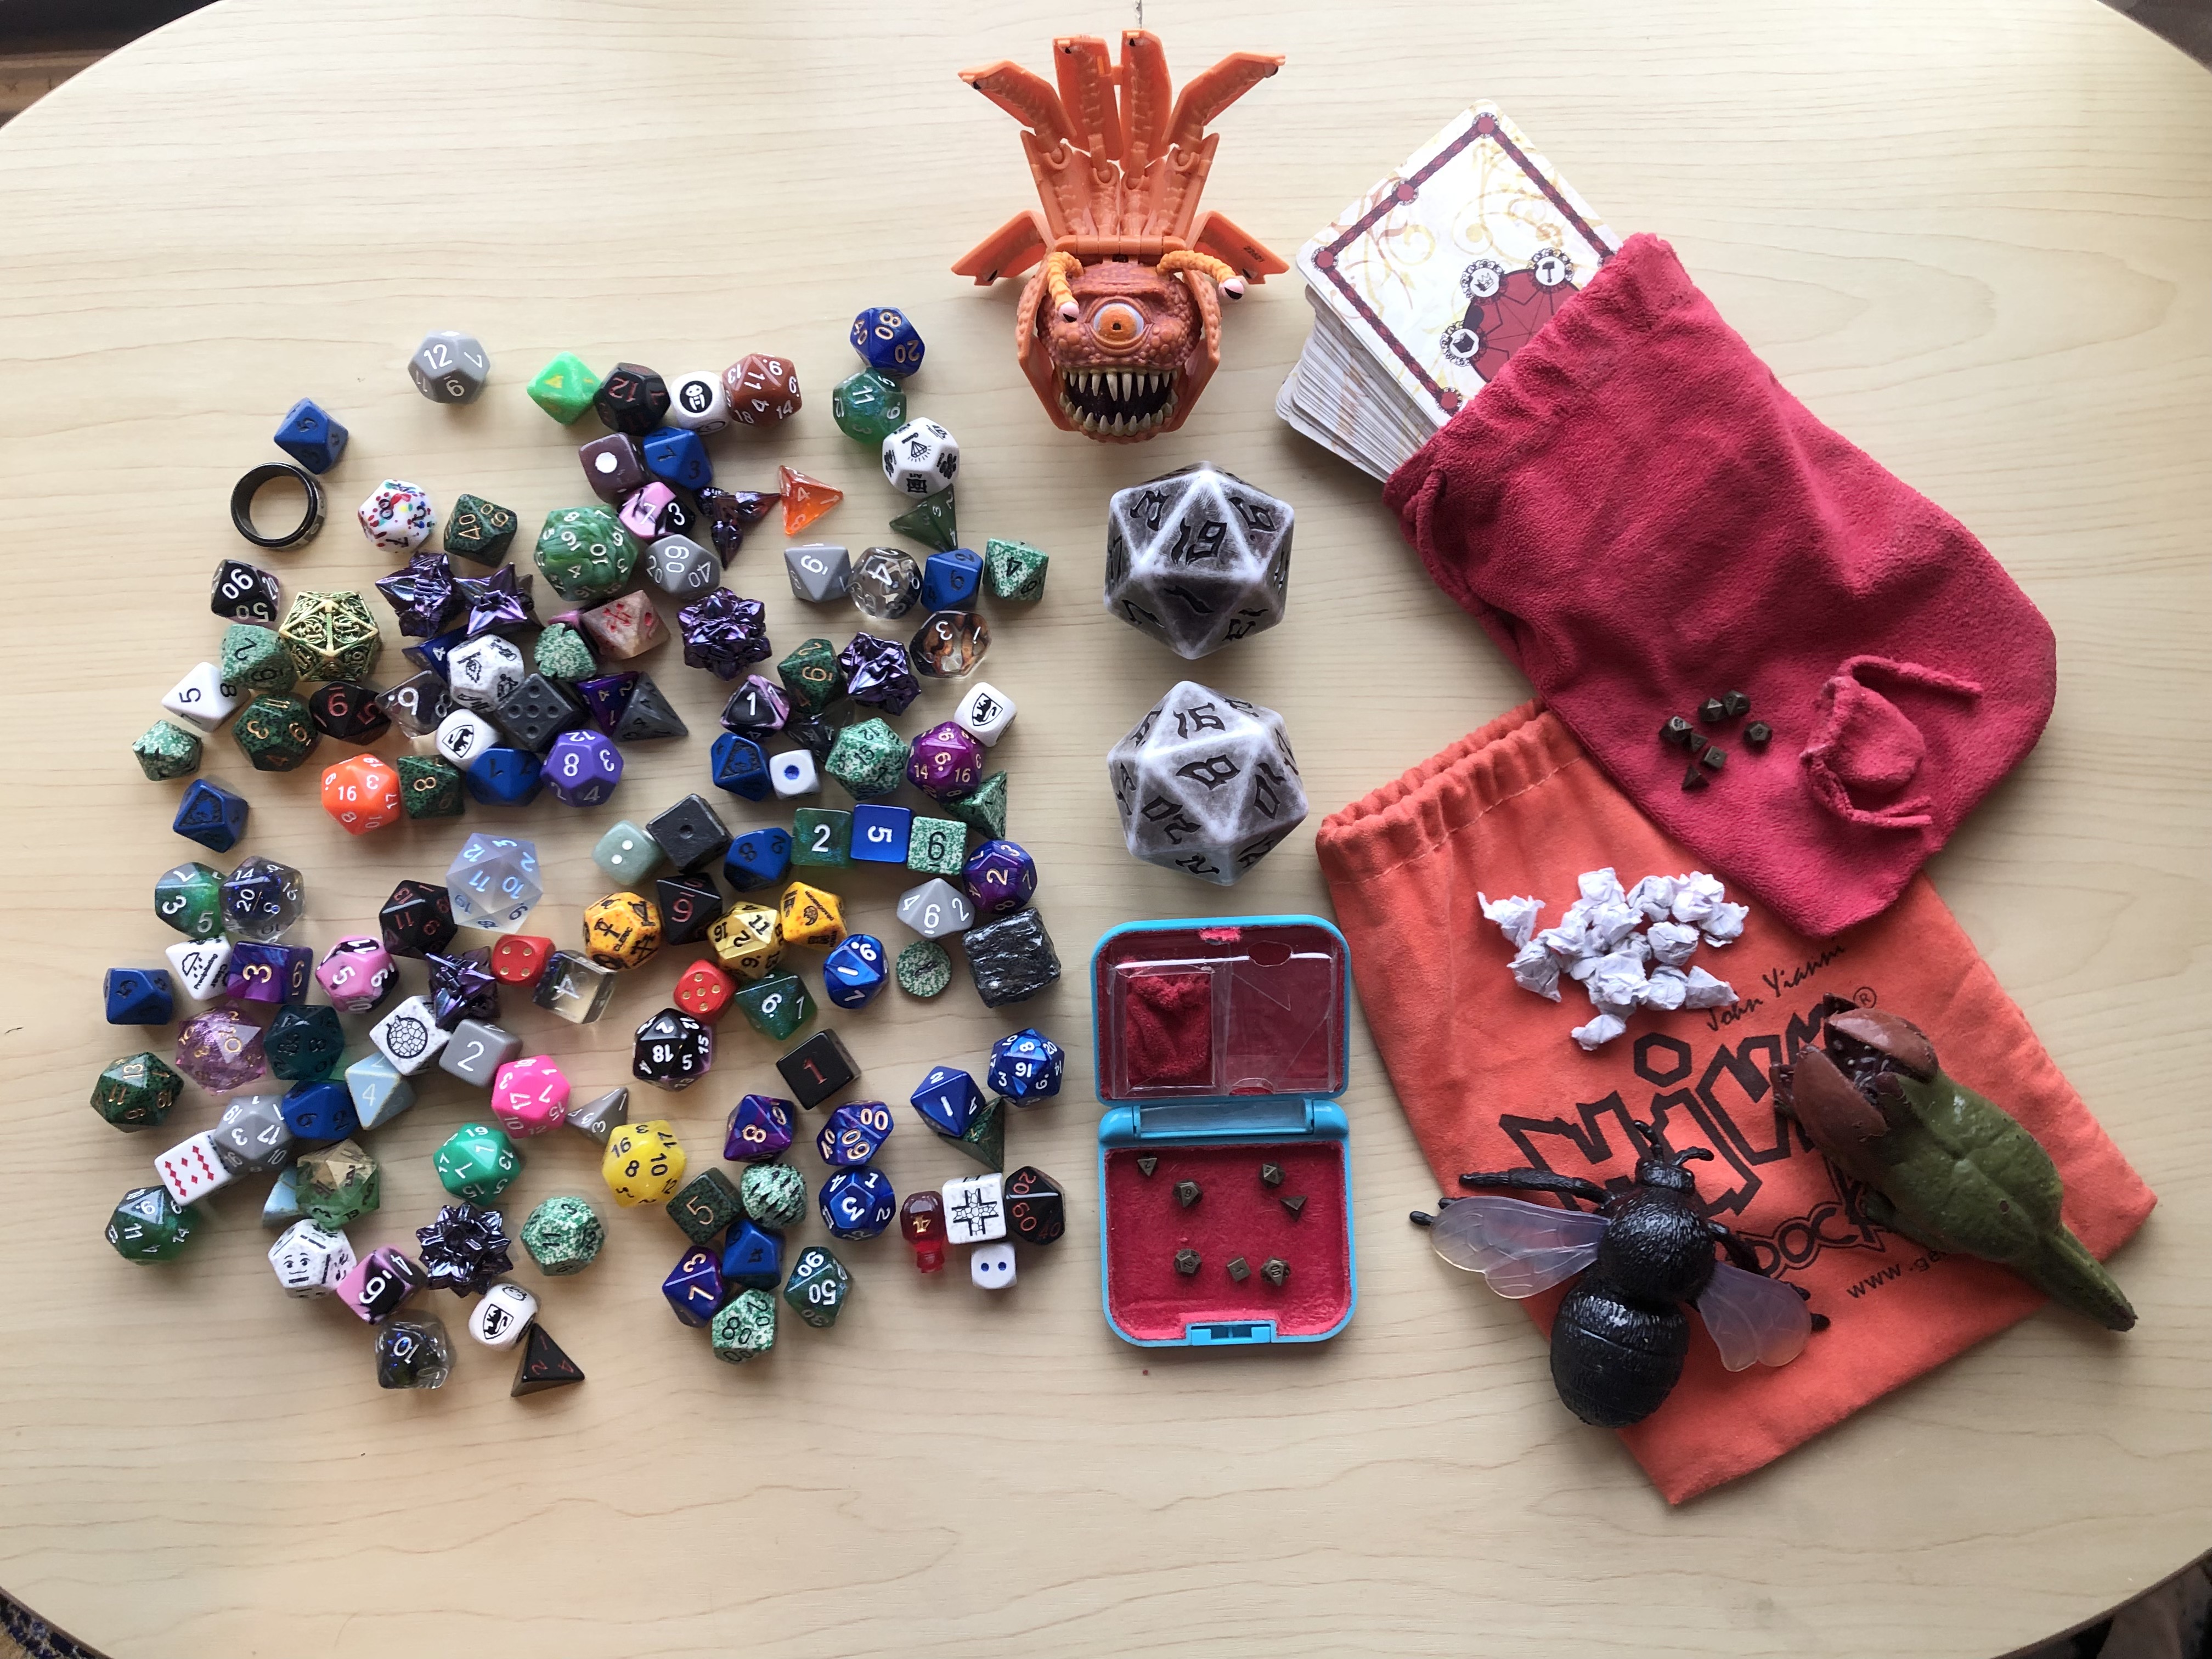 The dice collection, showing two giant grey chonk dice, the orange diceling of the beholder, the and the majority of the dice spread out inside the box lid of the d&d starter set. Beside it is the tiny dice roller box with tiny dice inside of it, the Hive tile game bag that acts as our dice bag, Simon and Lotus, the giant housefly and demodog, eating from a pile of scrap paper pieces, and the Harrow deck of many things, with tiny dice and dice bag on top of it.